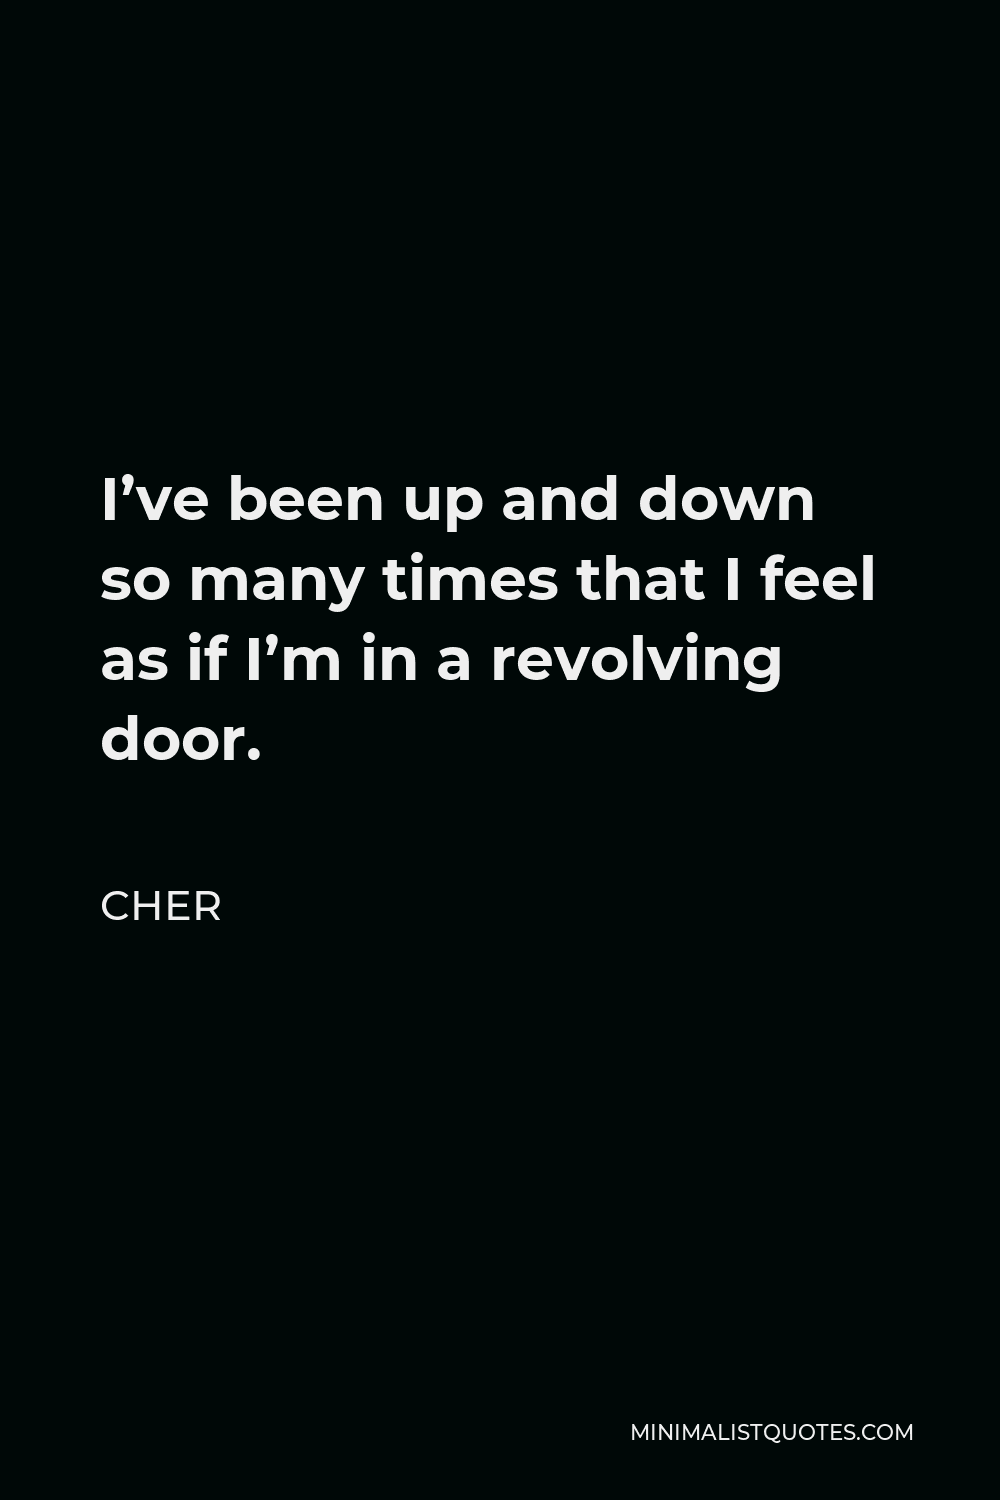 Cher Quote - I’ve been up and down so many times that I feel as if I’m in a revolving door.